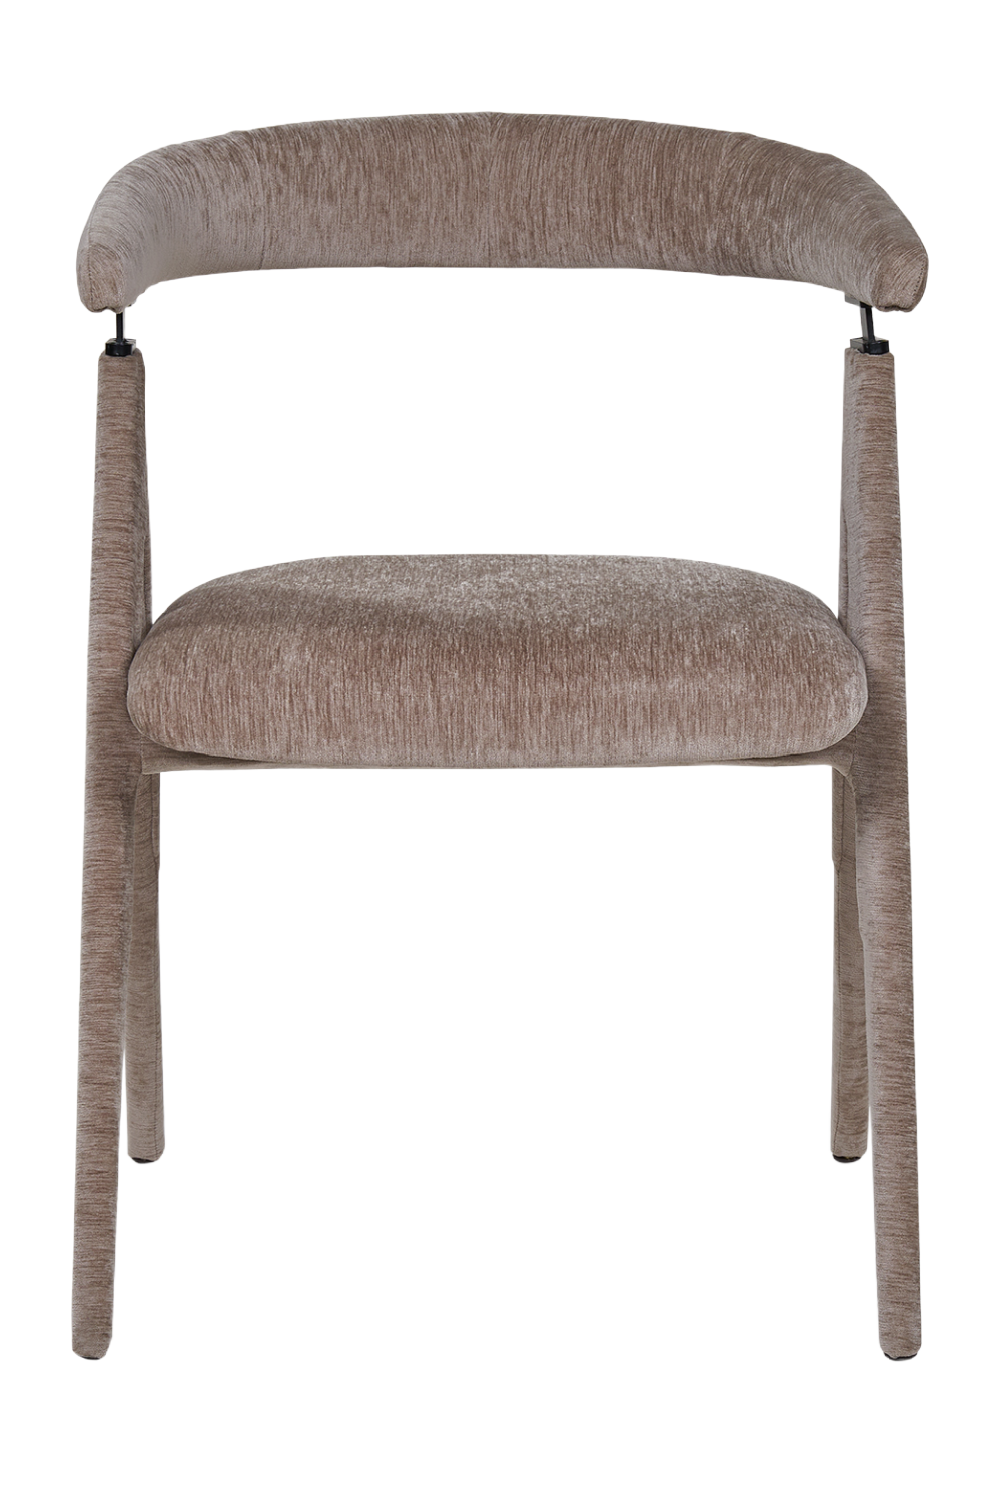 Modern C-Shaped Dining Chair | Liang & Eimil Kelly | Oroa.com